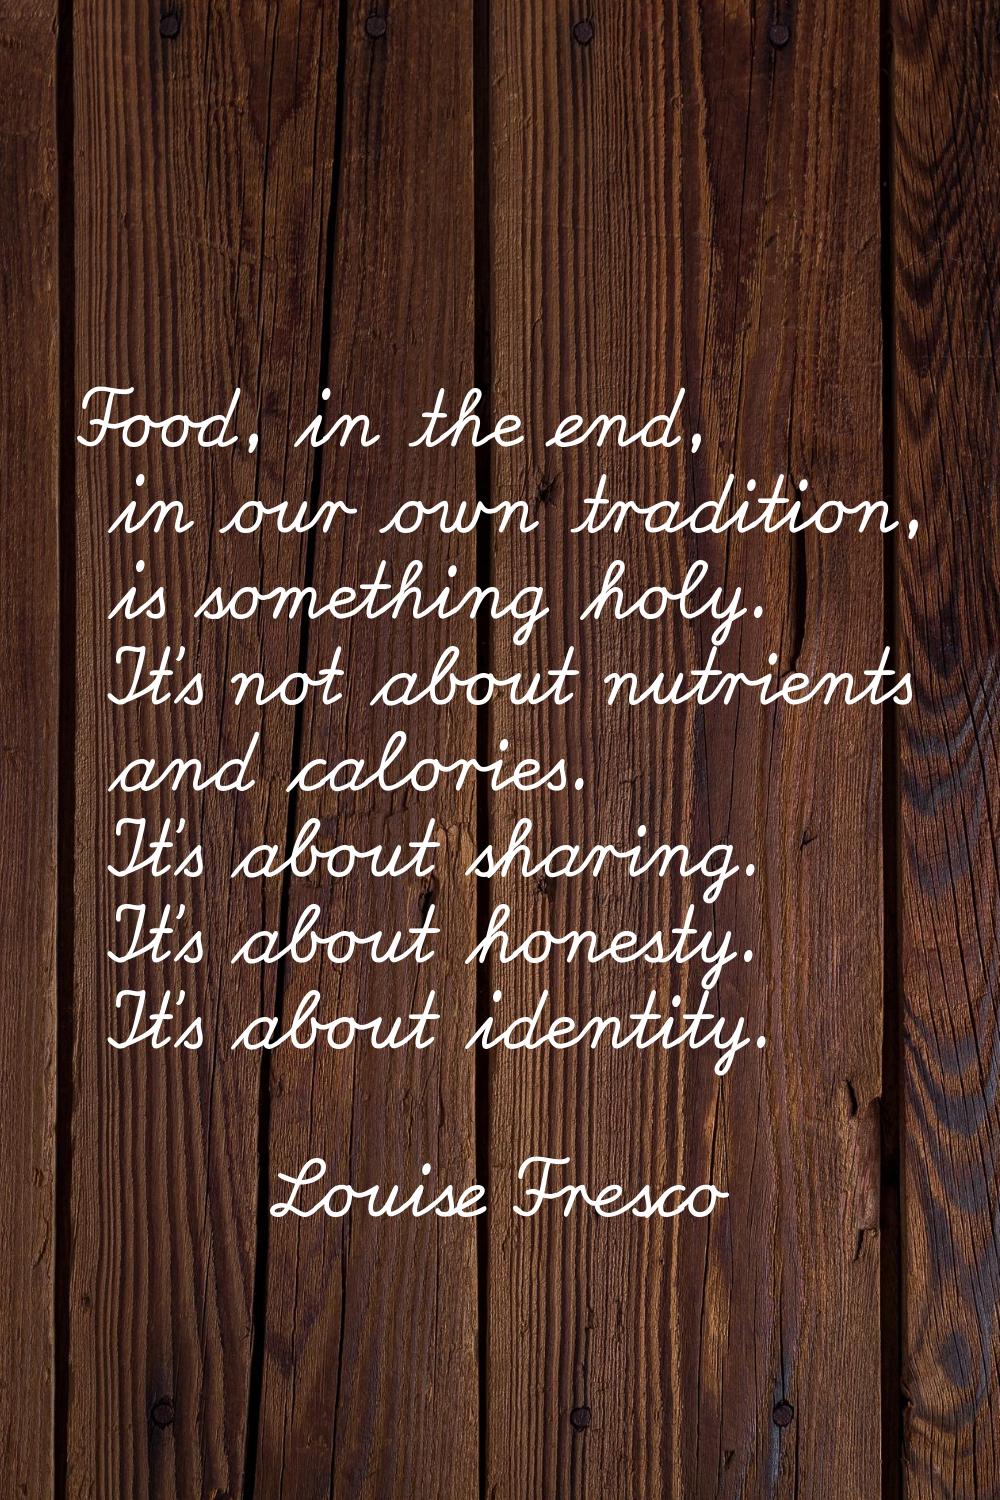 Food, in the end, in our own tradition, is something holy. It's not about nutrients and calories. I